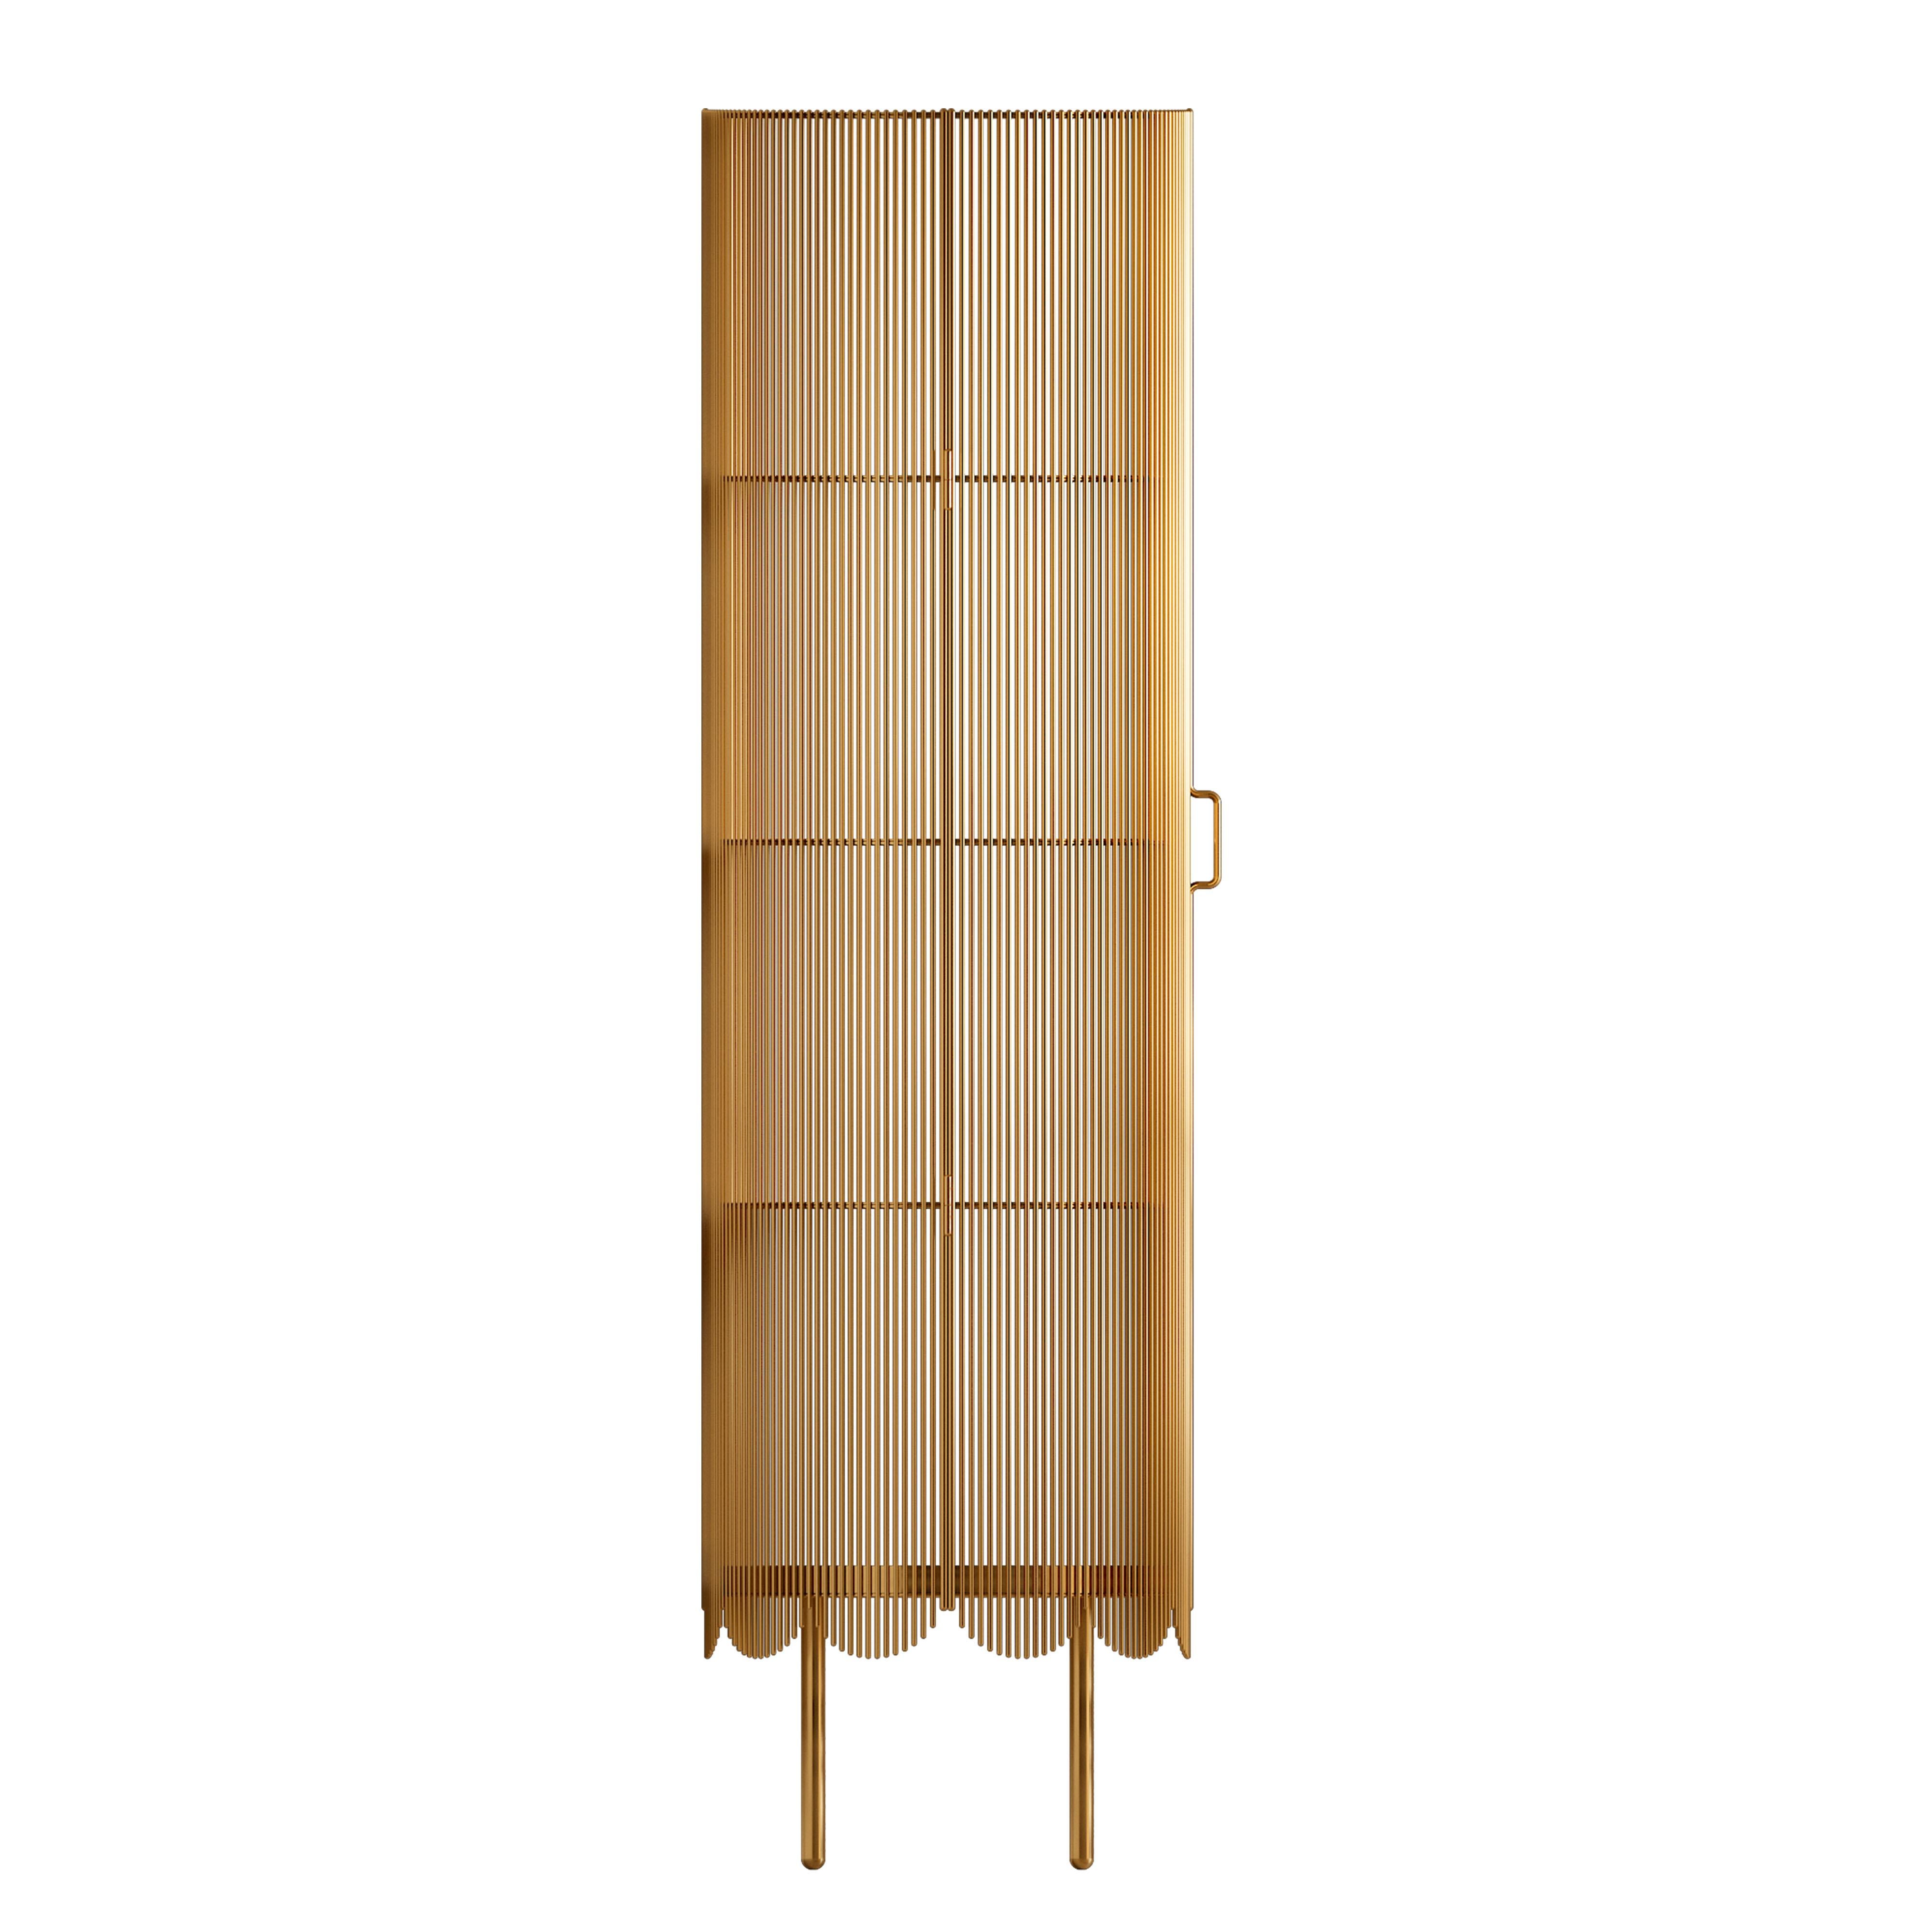 Strings storage cabinet gold by Nika Zupanc is a tall metal cabinet made of multiple steel 